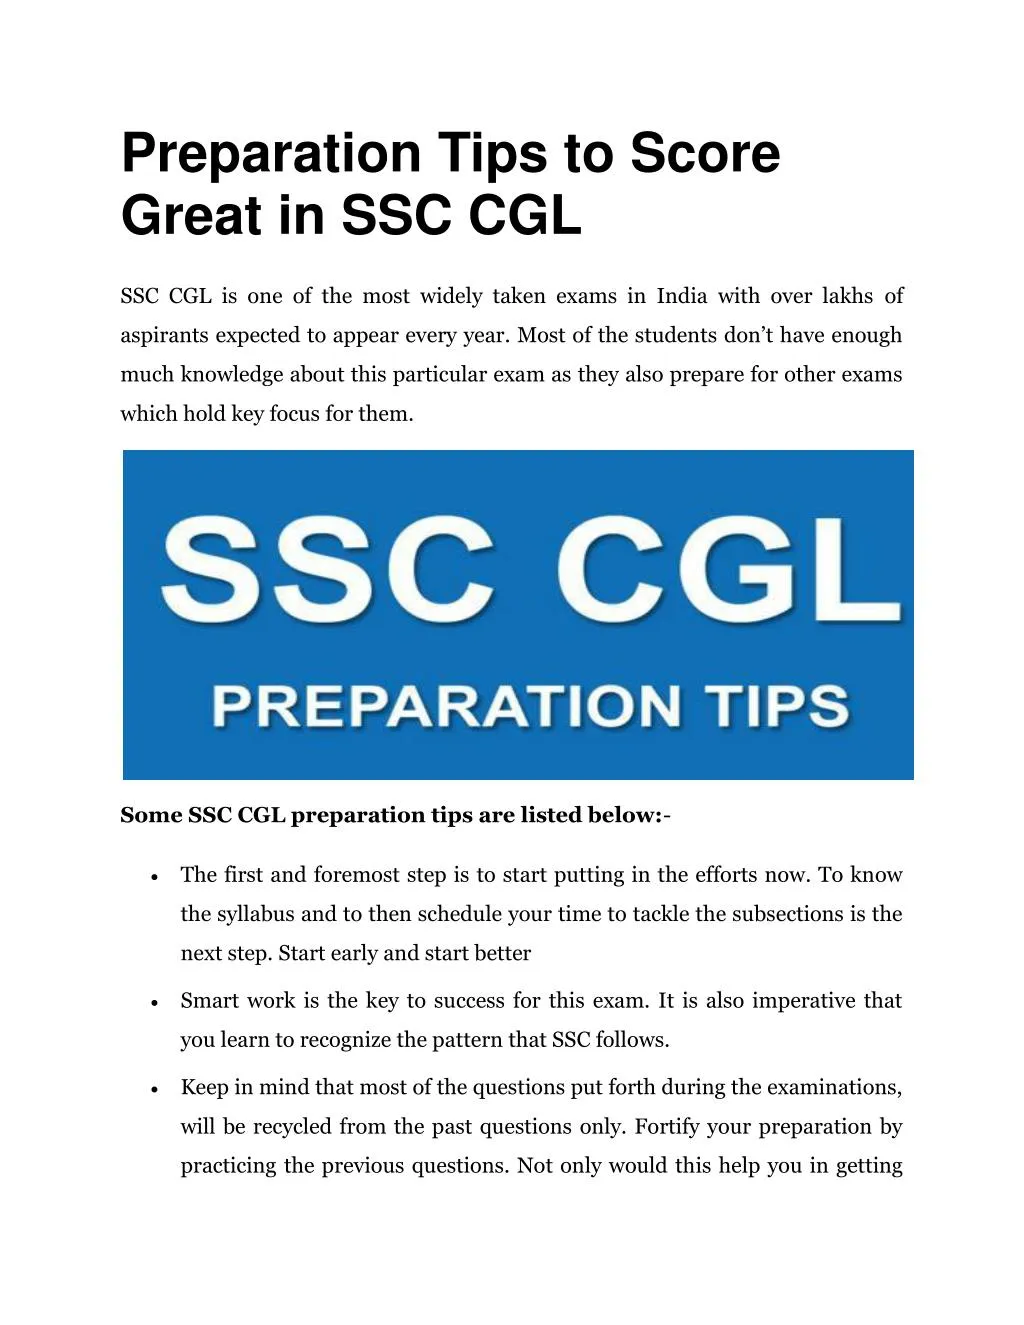 preparation tips to score great in ssc cgl